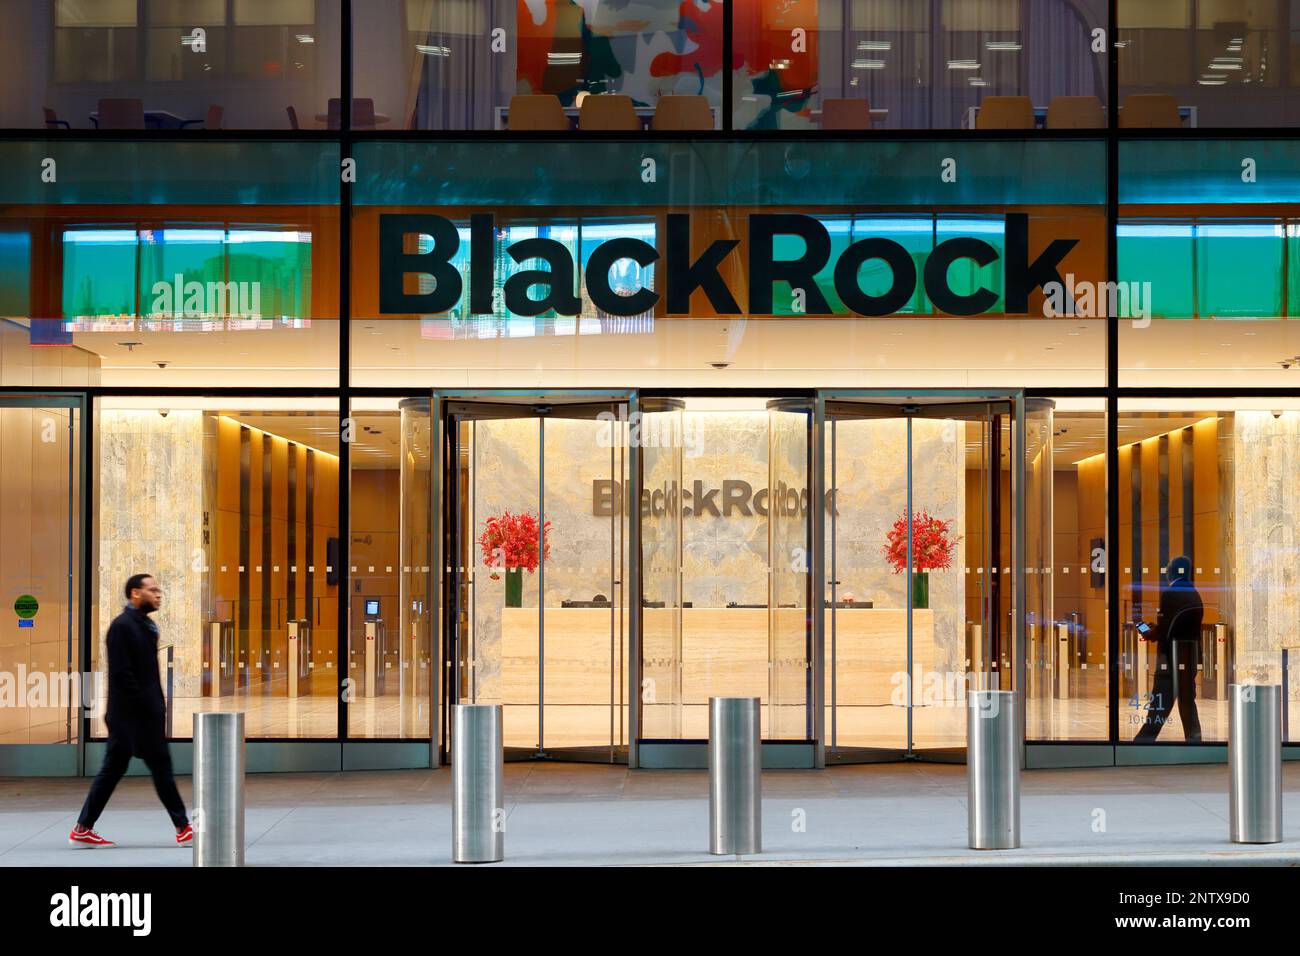 BlackRock corporate headquarters, 50 Hudson Yards, New York. They are an asset management, investment company. Stock Photo